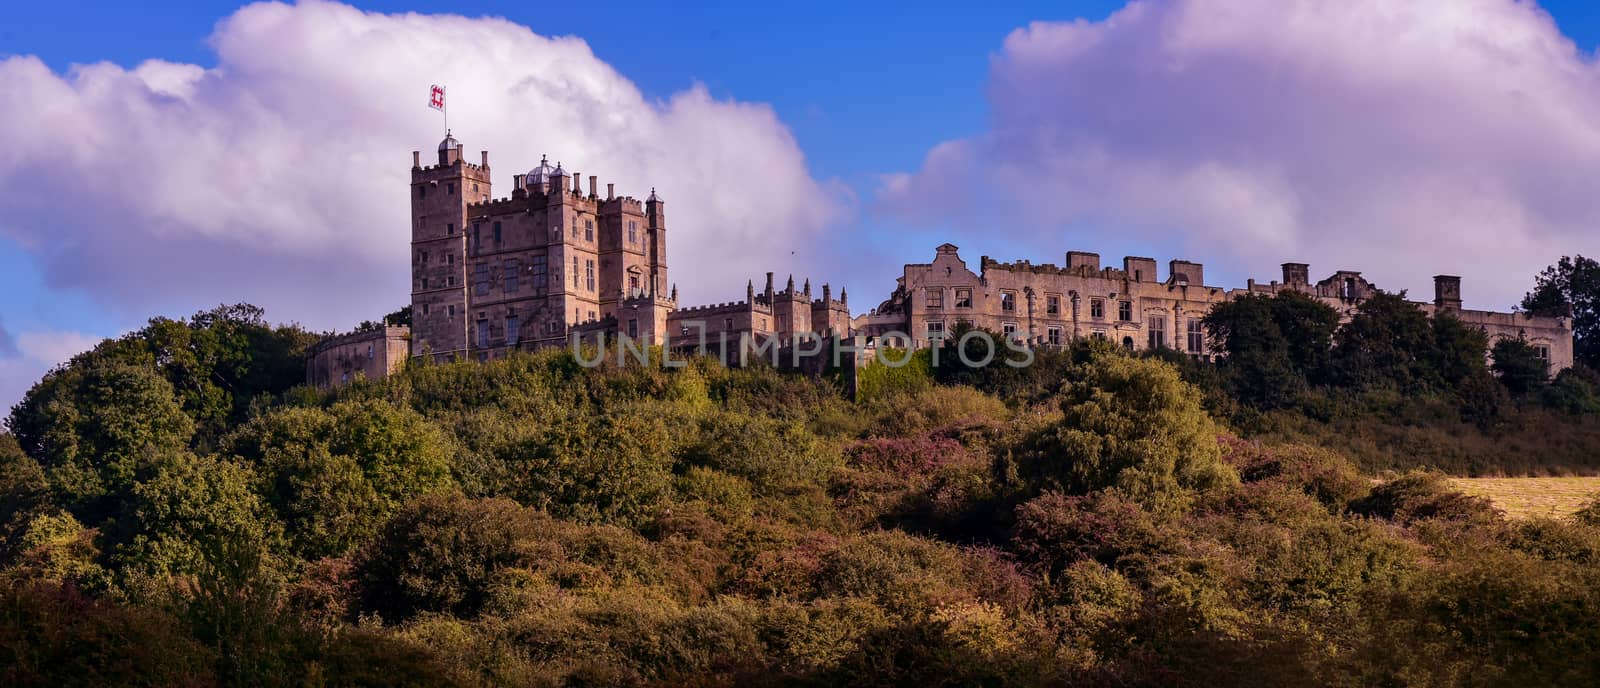 Panorama of Bolsover Castle in Derbyshire England,used with colour effect.